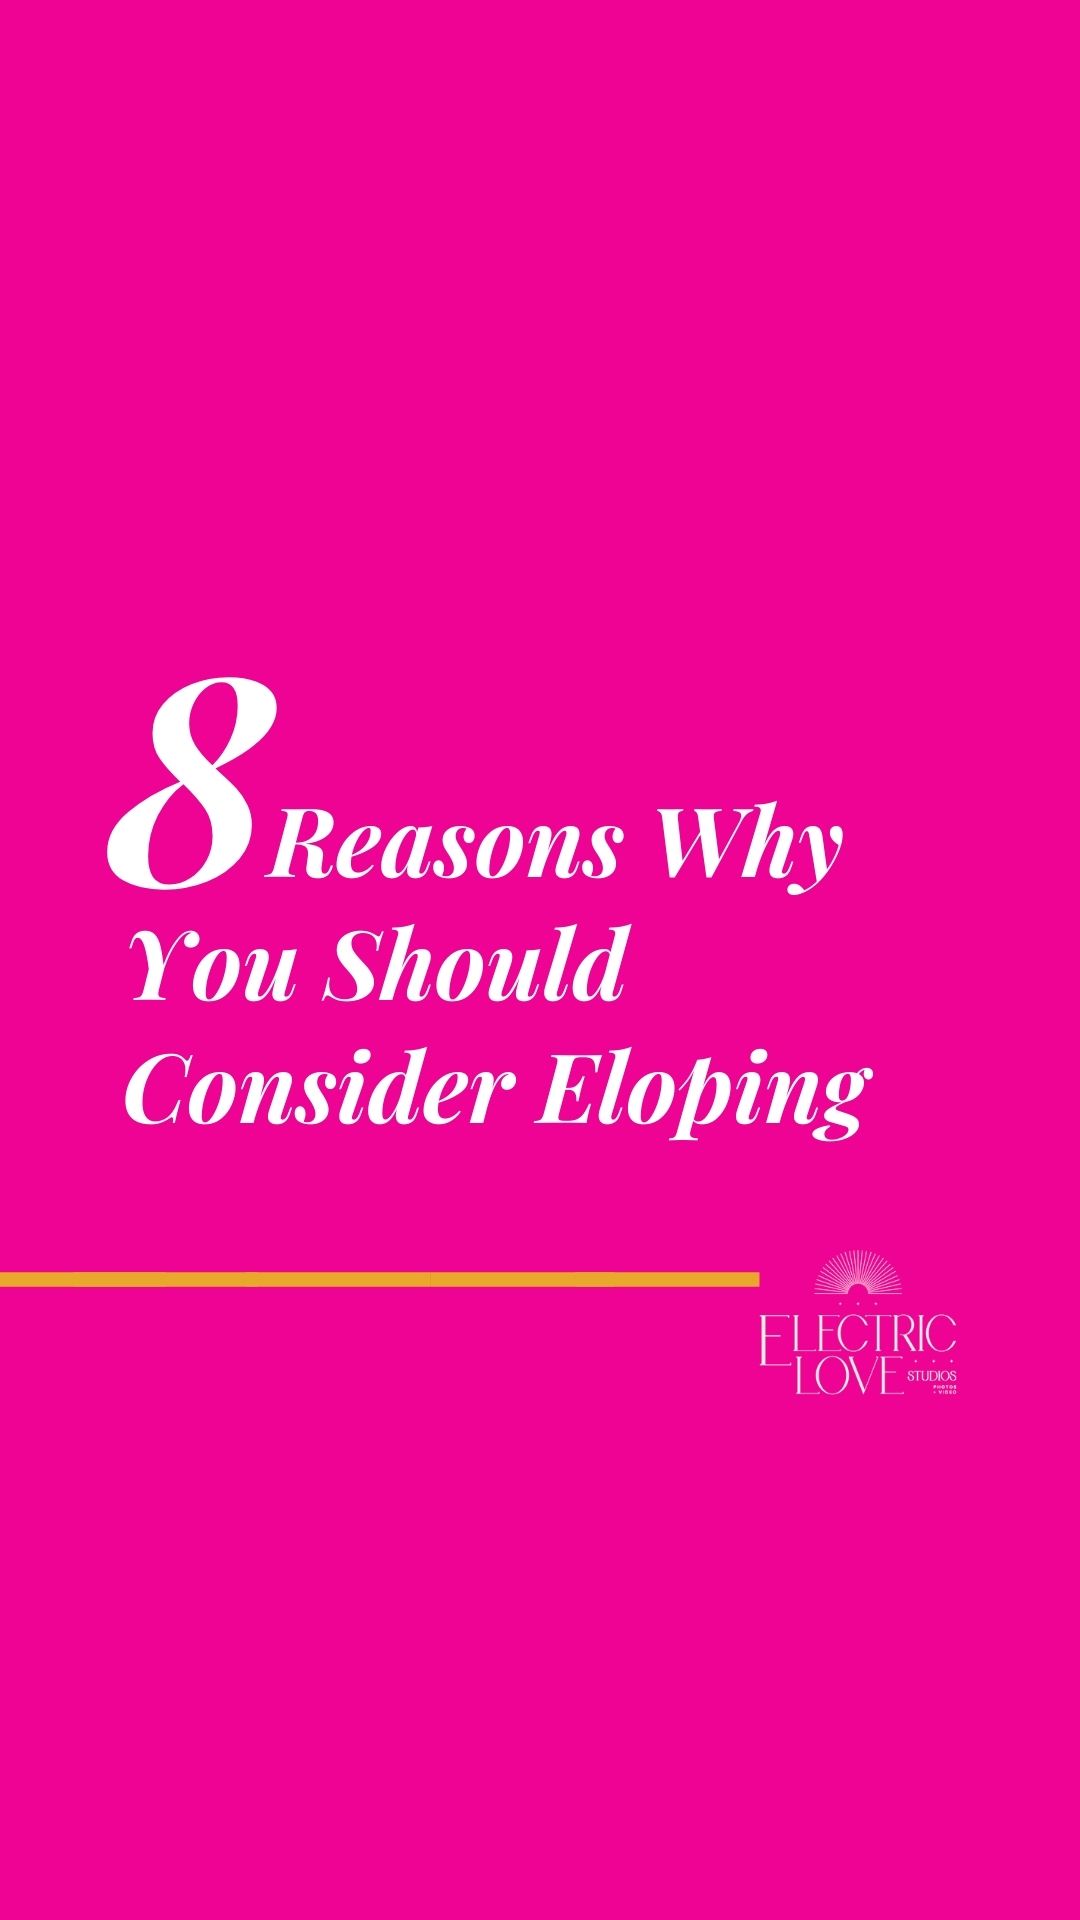 8-reasons-why-you-should-consider-eloping